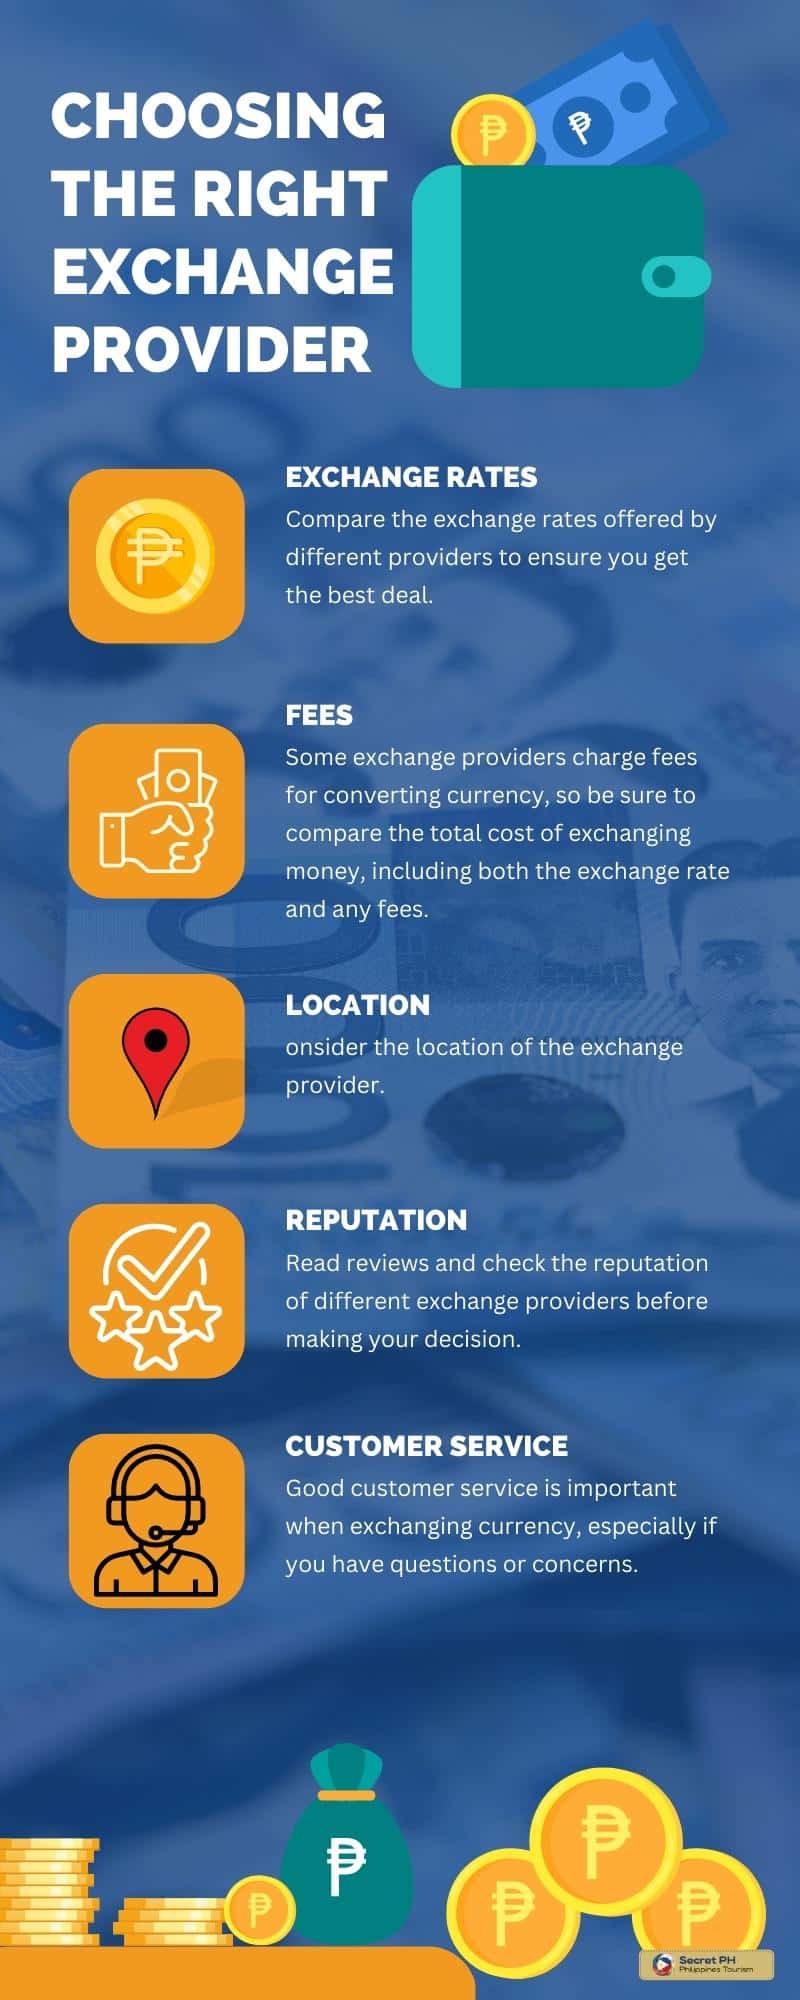 Choosing the right exchange provider